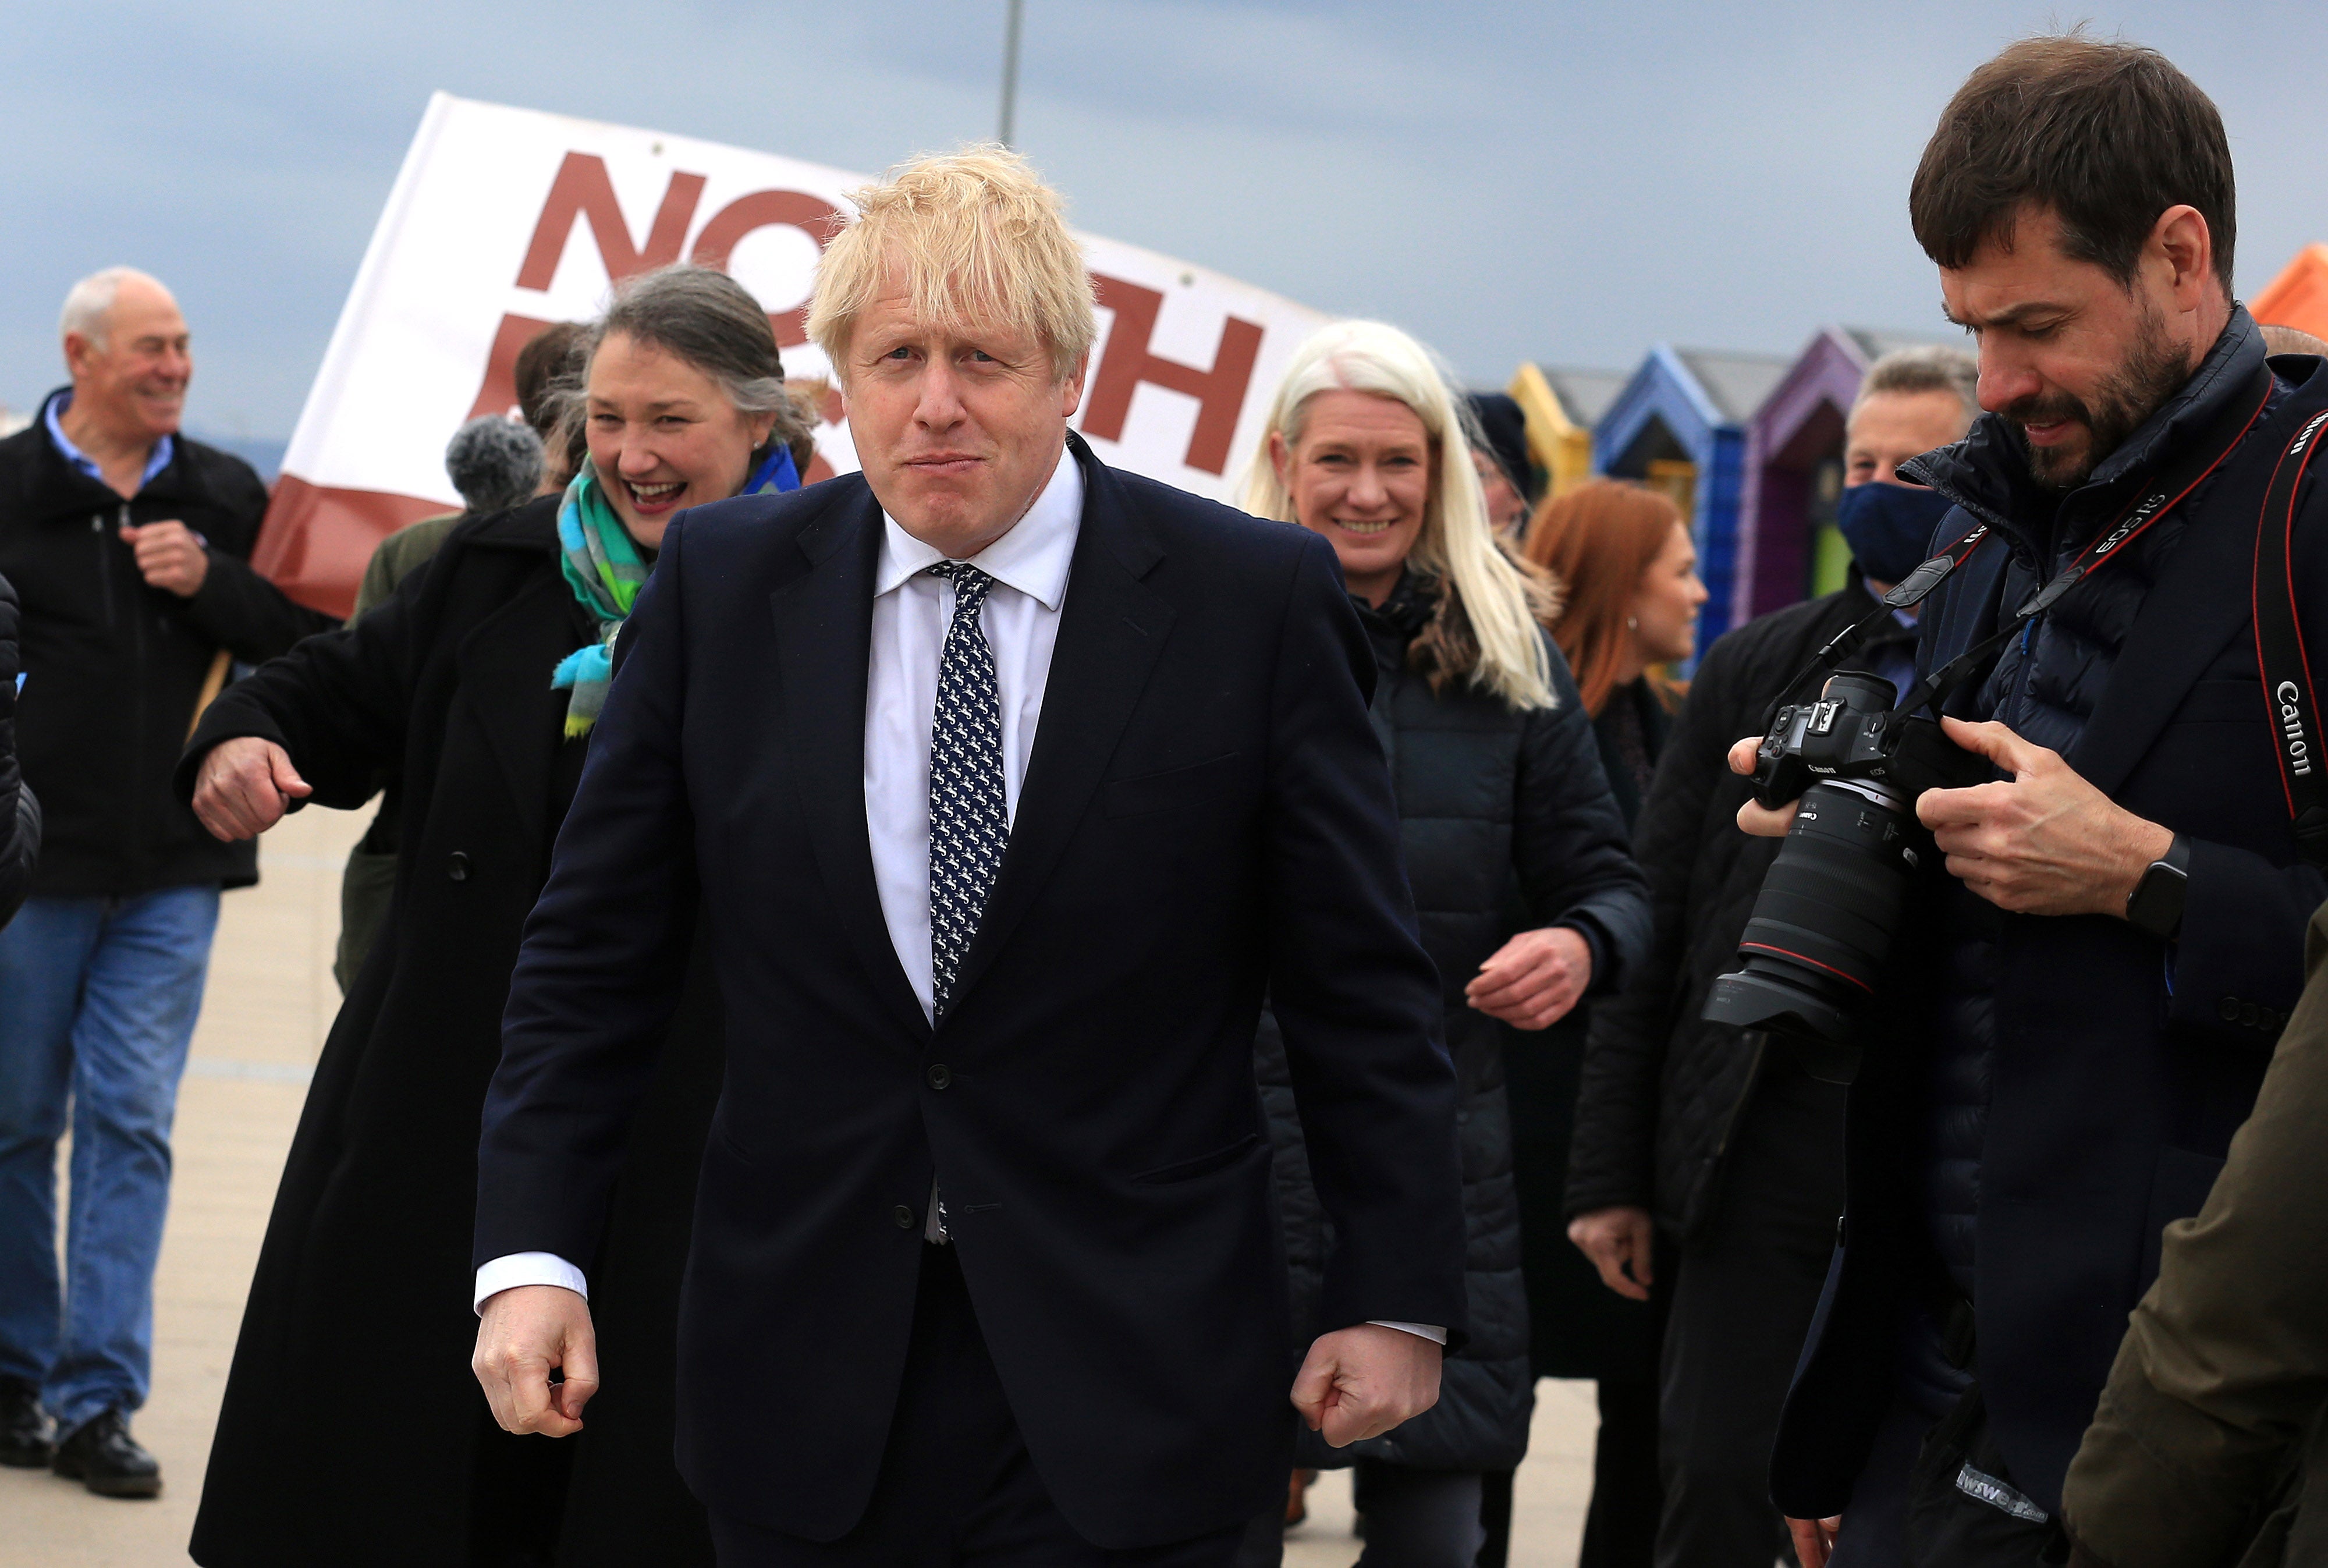 Jetting in: The prime minister in Hartlepool